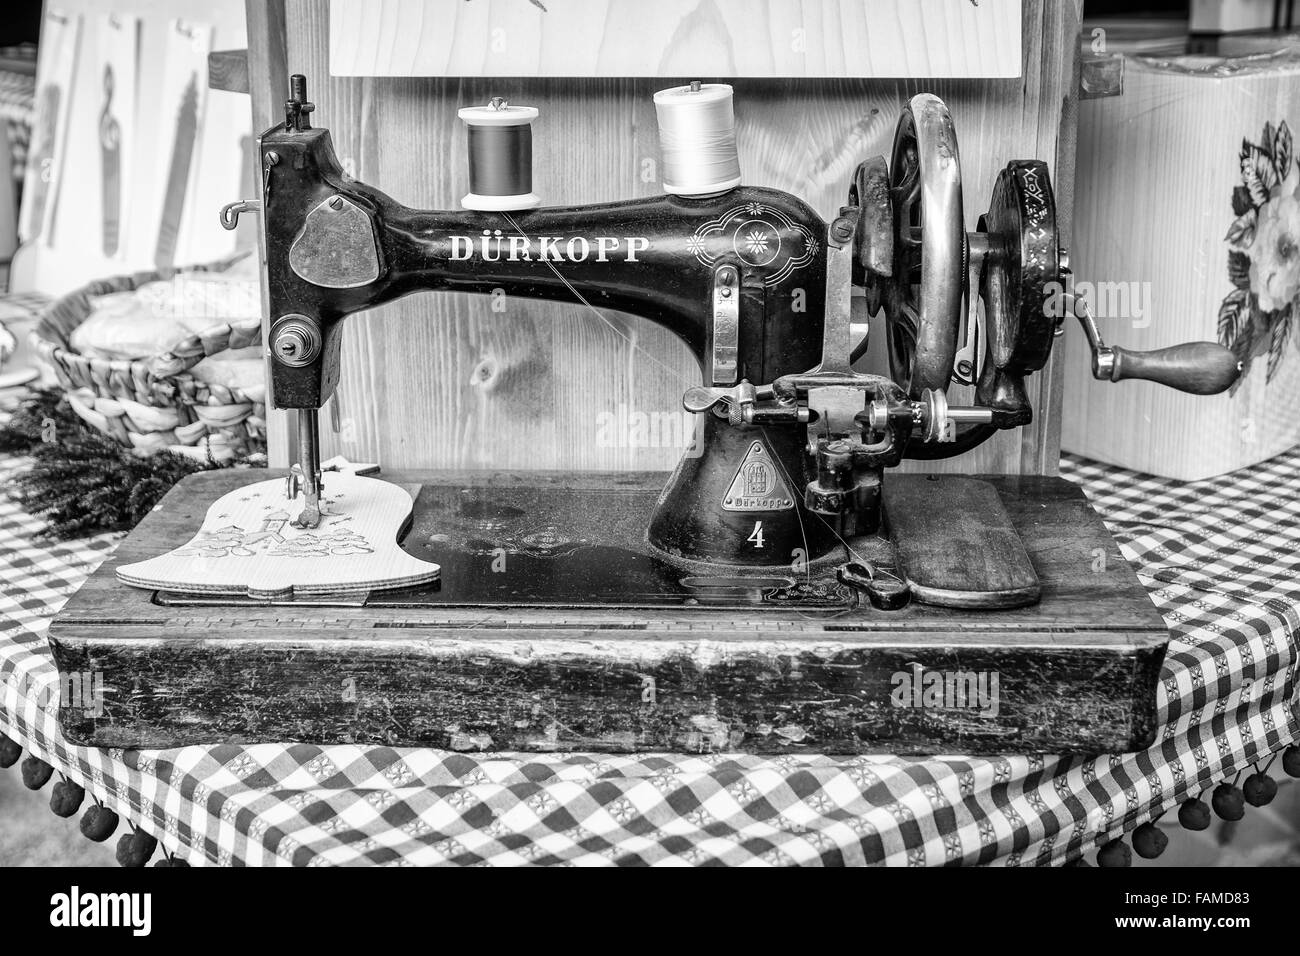 Old manual sewing machine used to embroider wooden shapes. Stock Photo